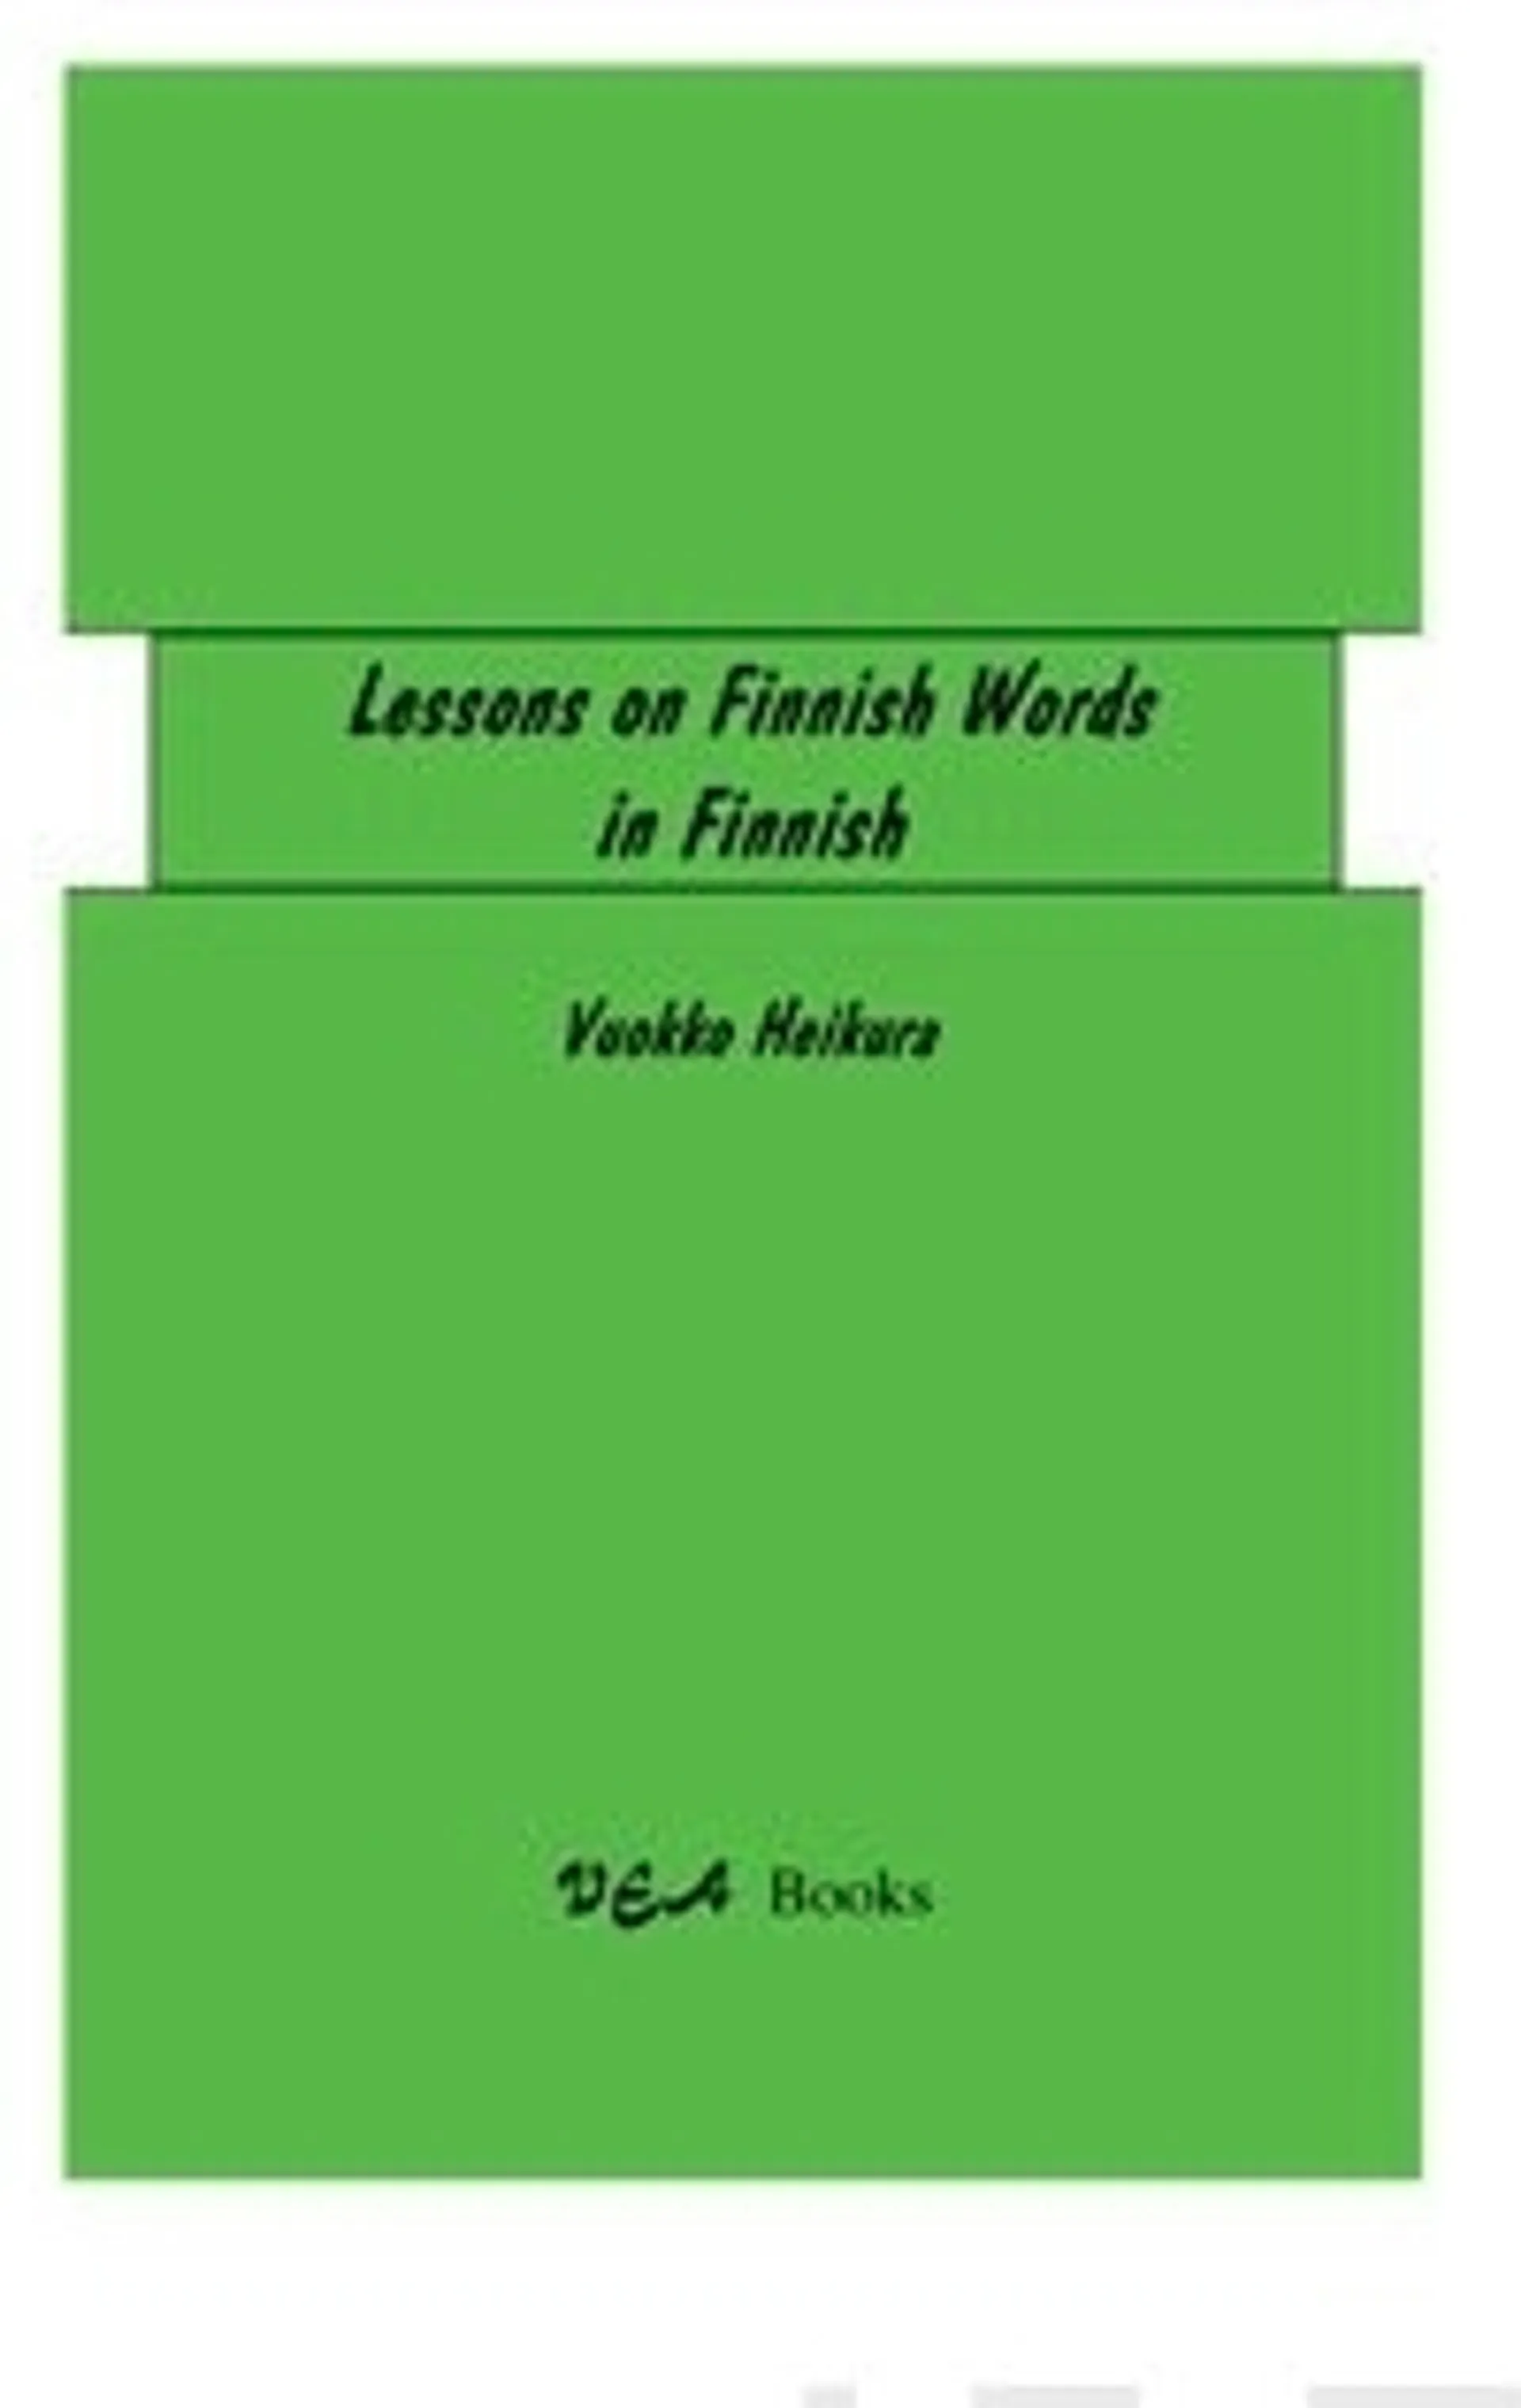 Lessons on Finnish words in Finnish